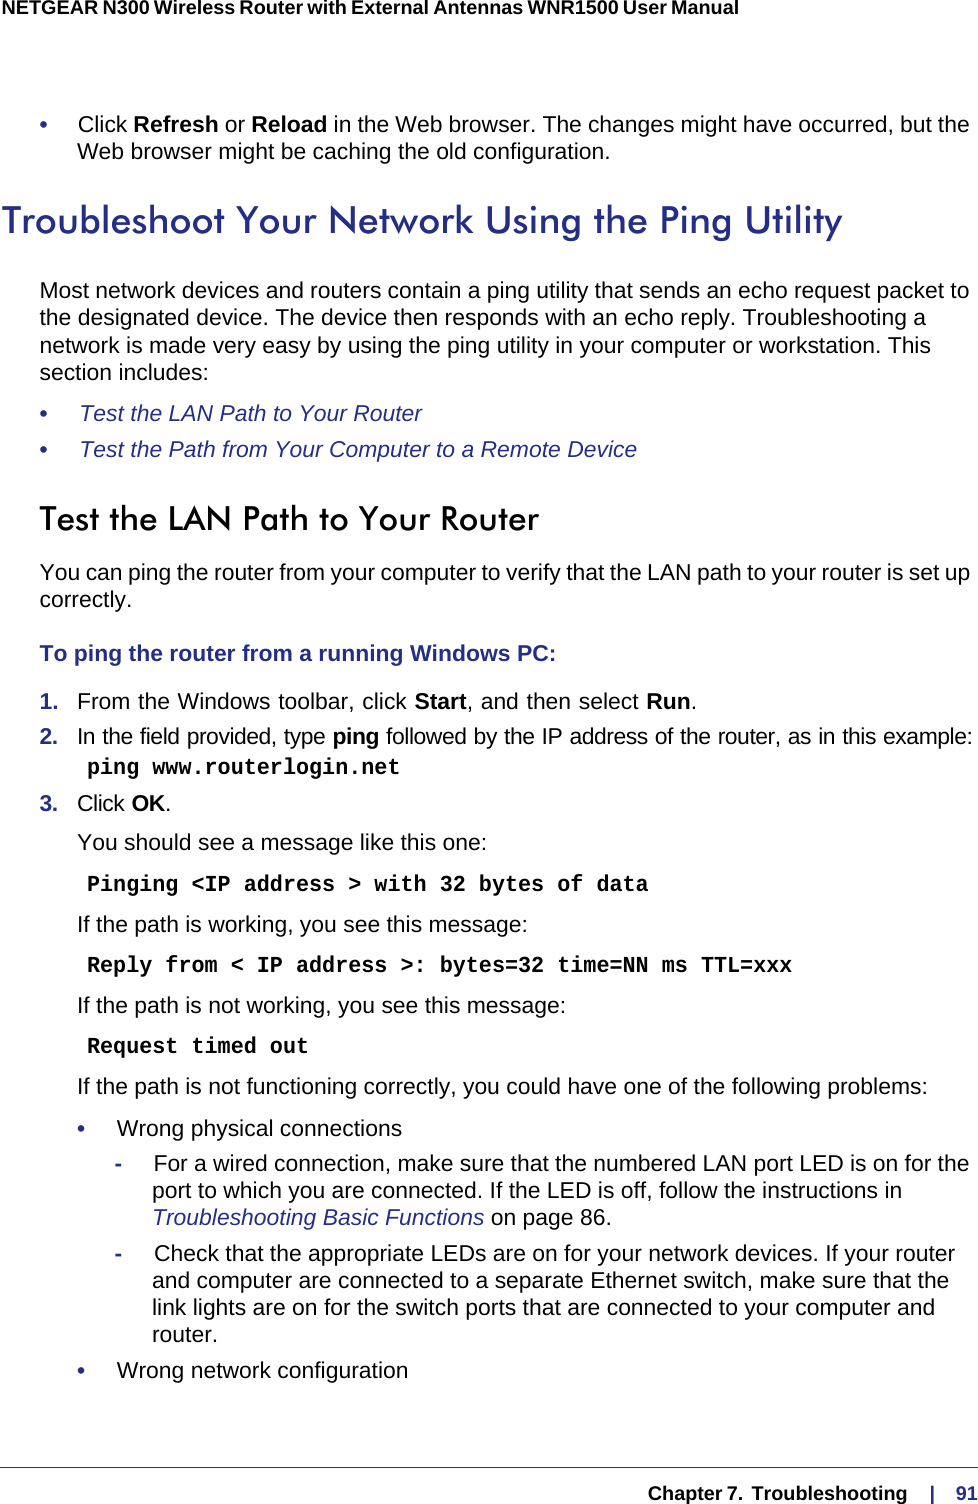   Chapter 7.  Troubleshooting     |    91NETGEAR N300 Wireless Router with External Antennas WNR1500 User Manual •     Click Refresh or Reload in the Web browser. The changes might have occurred, but the Web browser might be caching the old configuration.Troubleshoot Your Network Using the Ping UtilityMost network devices and routers contain a ping utility that sends an echo request packet to the designated device. The device then responds with an echo reply. Troubleshooting a network is made very easy by using the ping utility in your computer or workstation. This section includes:•     Test the LAN Path to Your Router •     Test the Path from Your Computer to a Remote Device Test the LAN Path to Your RouterYou can ping the router from your computer to verify that the LAN path to your router is set up correctly.To ping the router from a running Windows PC:1.  From the Windows toolbar, click Start, and then select Run.2.  In the field provided, type ping followed by the IP address of the router, as in this example:    ping www.routerlogin.net3.  Click OK.You should see a message like this one:    Pinging &lt;IP address &gt; with 32 bytes of dataIf the path is working, you see this message:    Reply from &lt; IP address &gt;: bytes=32 time=NN ms TTL=xxxIf the path is not working, you see this message:    Request timed outIf the path is not functioning correctly, you could have one of the following problems:•     Wrong physical connections-     For a wired connection, make sure that the numbered LAN port LED is on for the port to which you are connected. If the LED is off, follow the instructions in Troubleshooting Basic Functions on page  86.-     Check that the appropriate LEDs are on for your network devices. If your router and computer are connected to a separate Ethernet switch, make sure that the link lights are on for the switch ports that are connected to your computer and router.•     Wrong network configuration